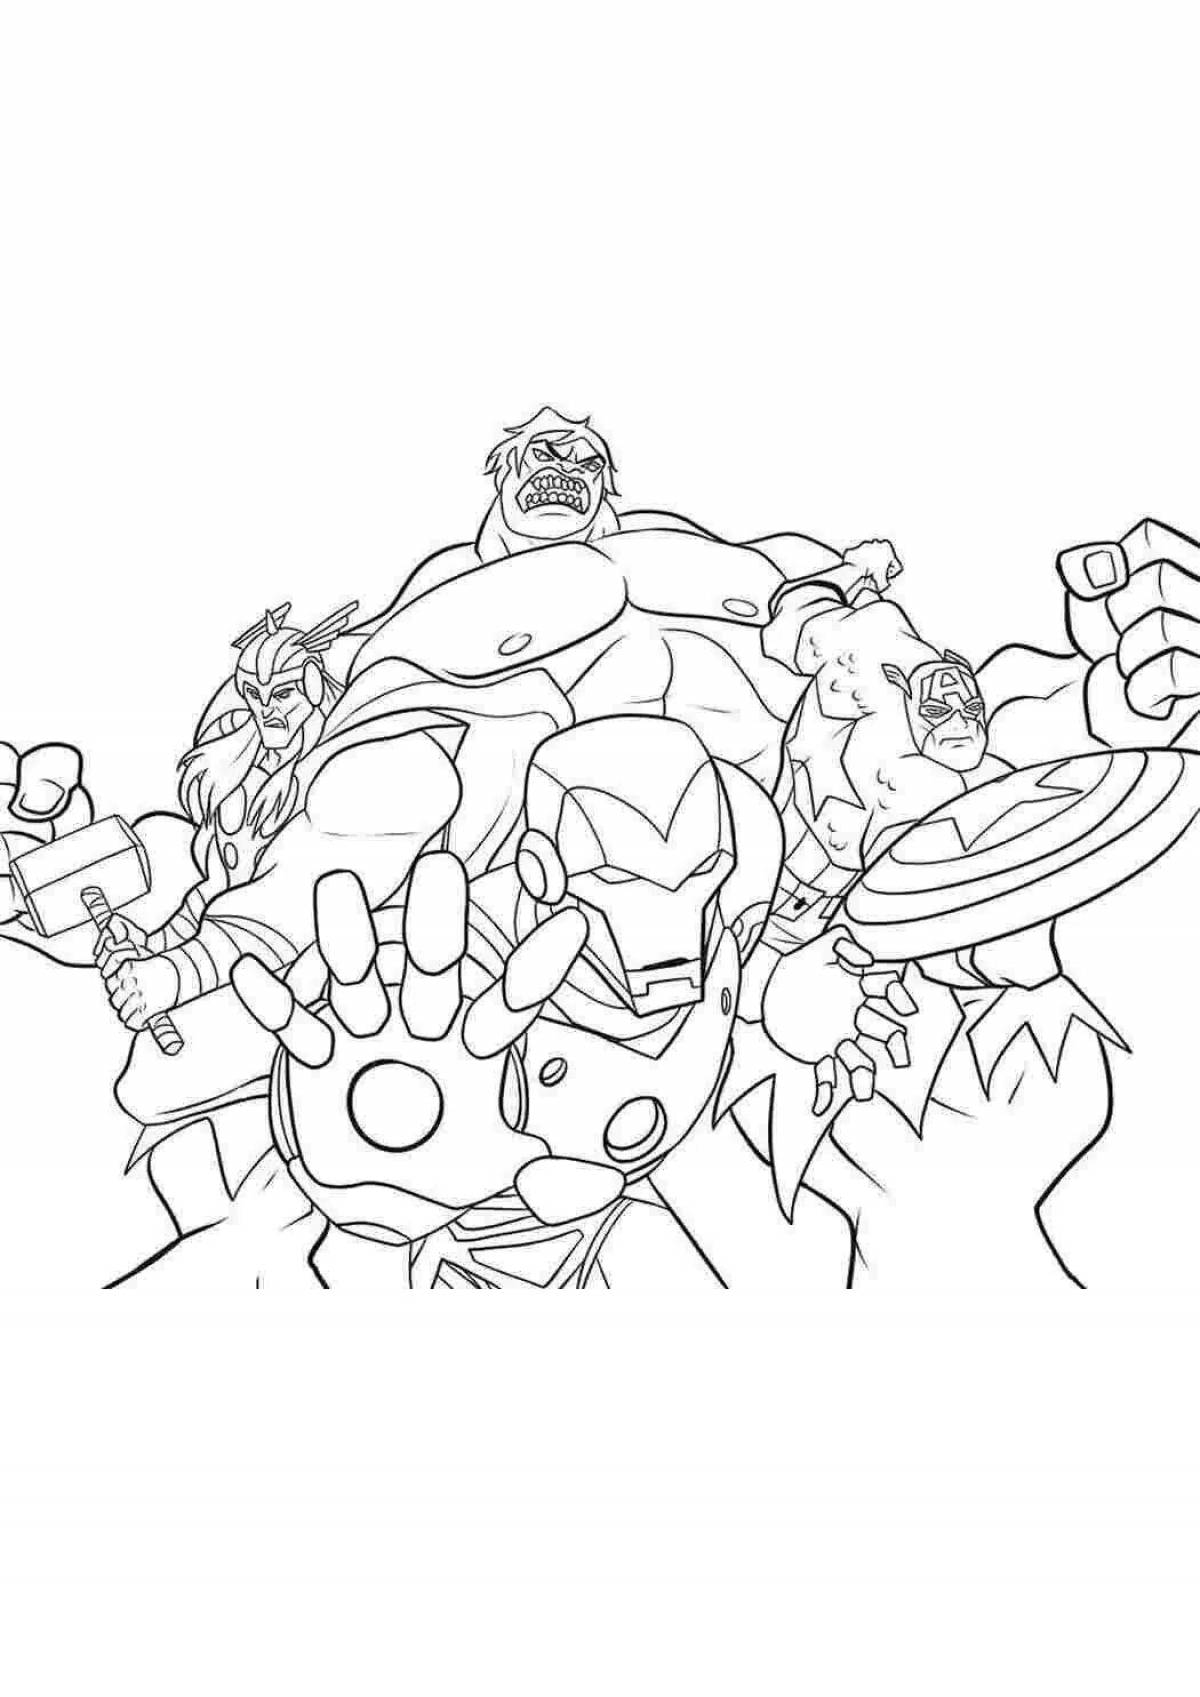 Animated avengers coloring book for boys